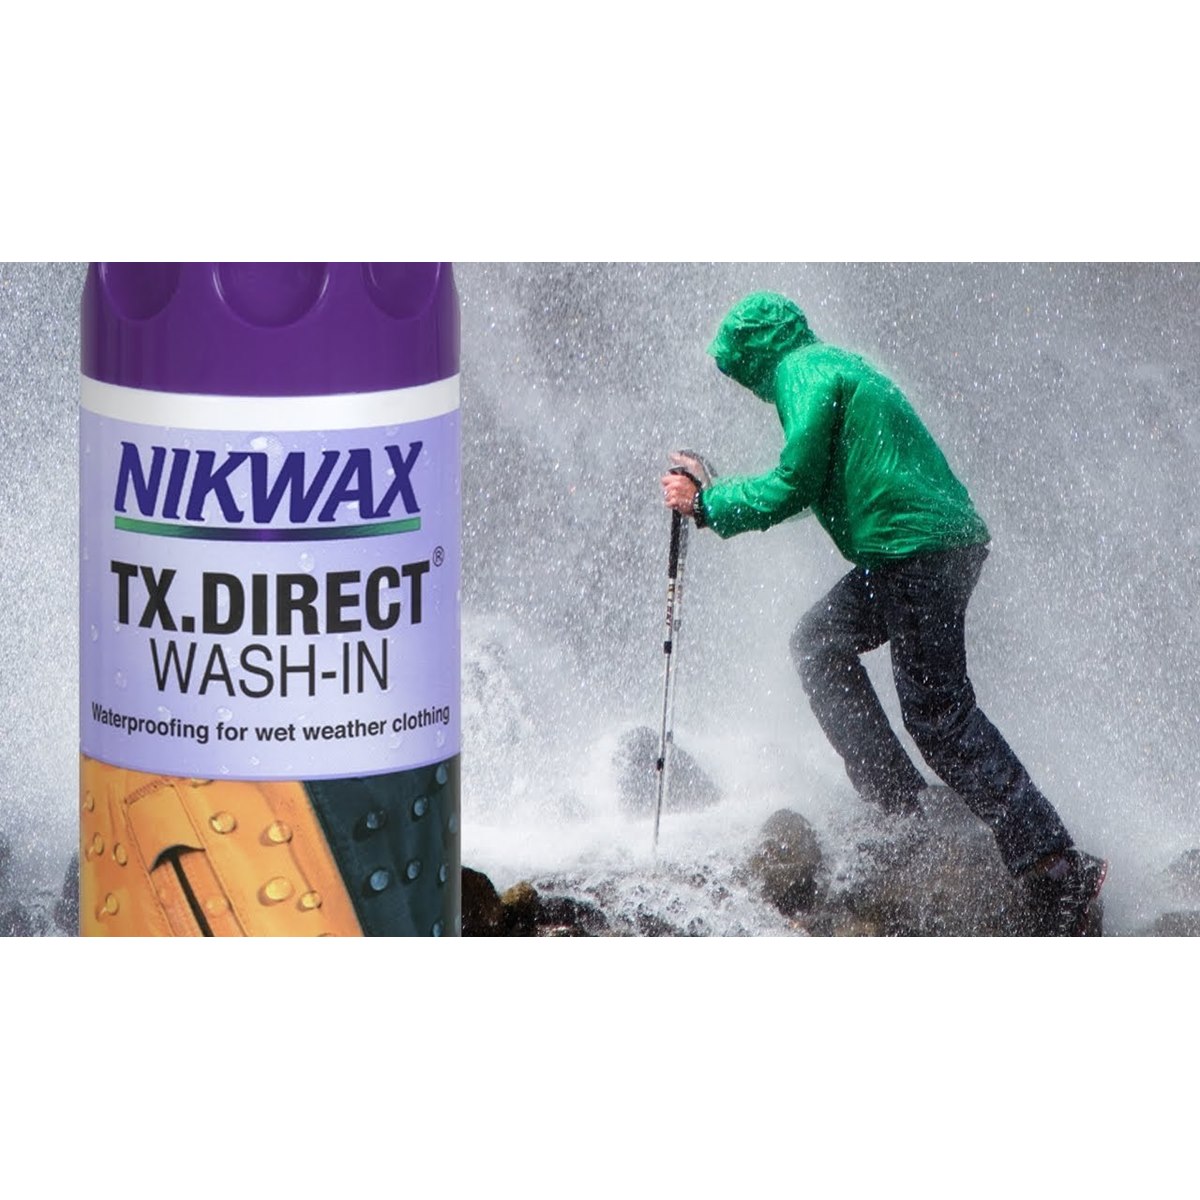 Where to Buy Nikwax TX Direct Wash In